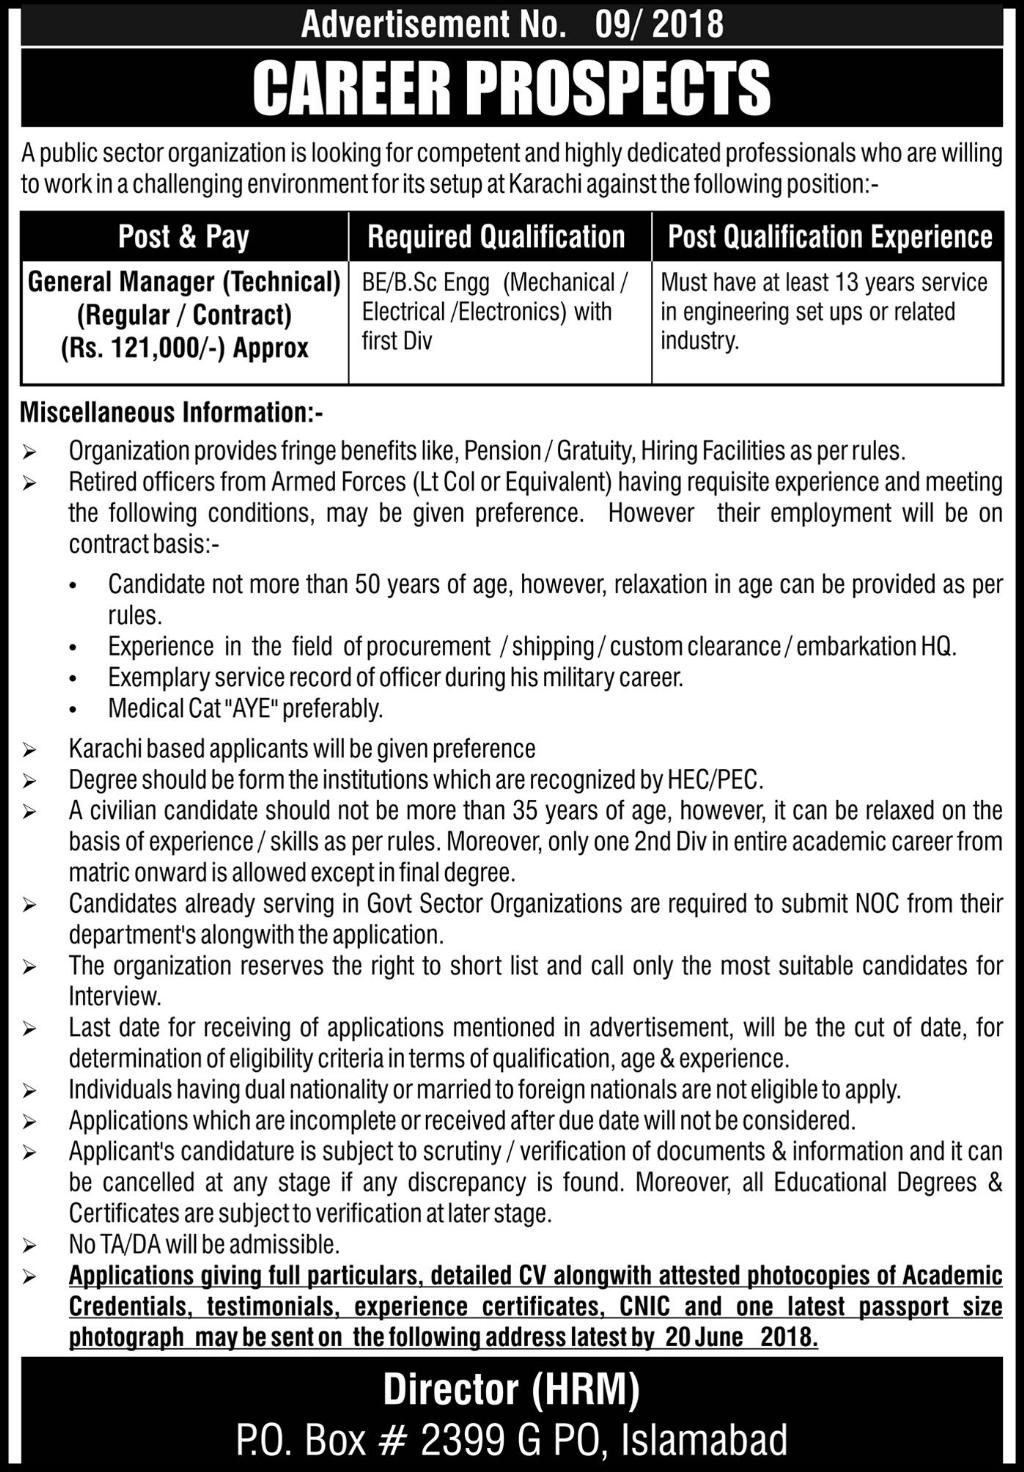 PO Box 2399 GPO Islamabad Jobs 2018 Public Sector Organization NESCOM For General Manager Technical